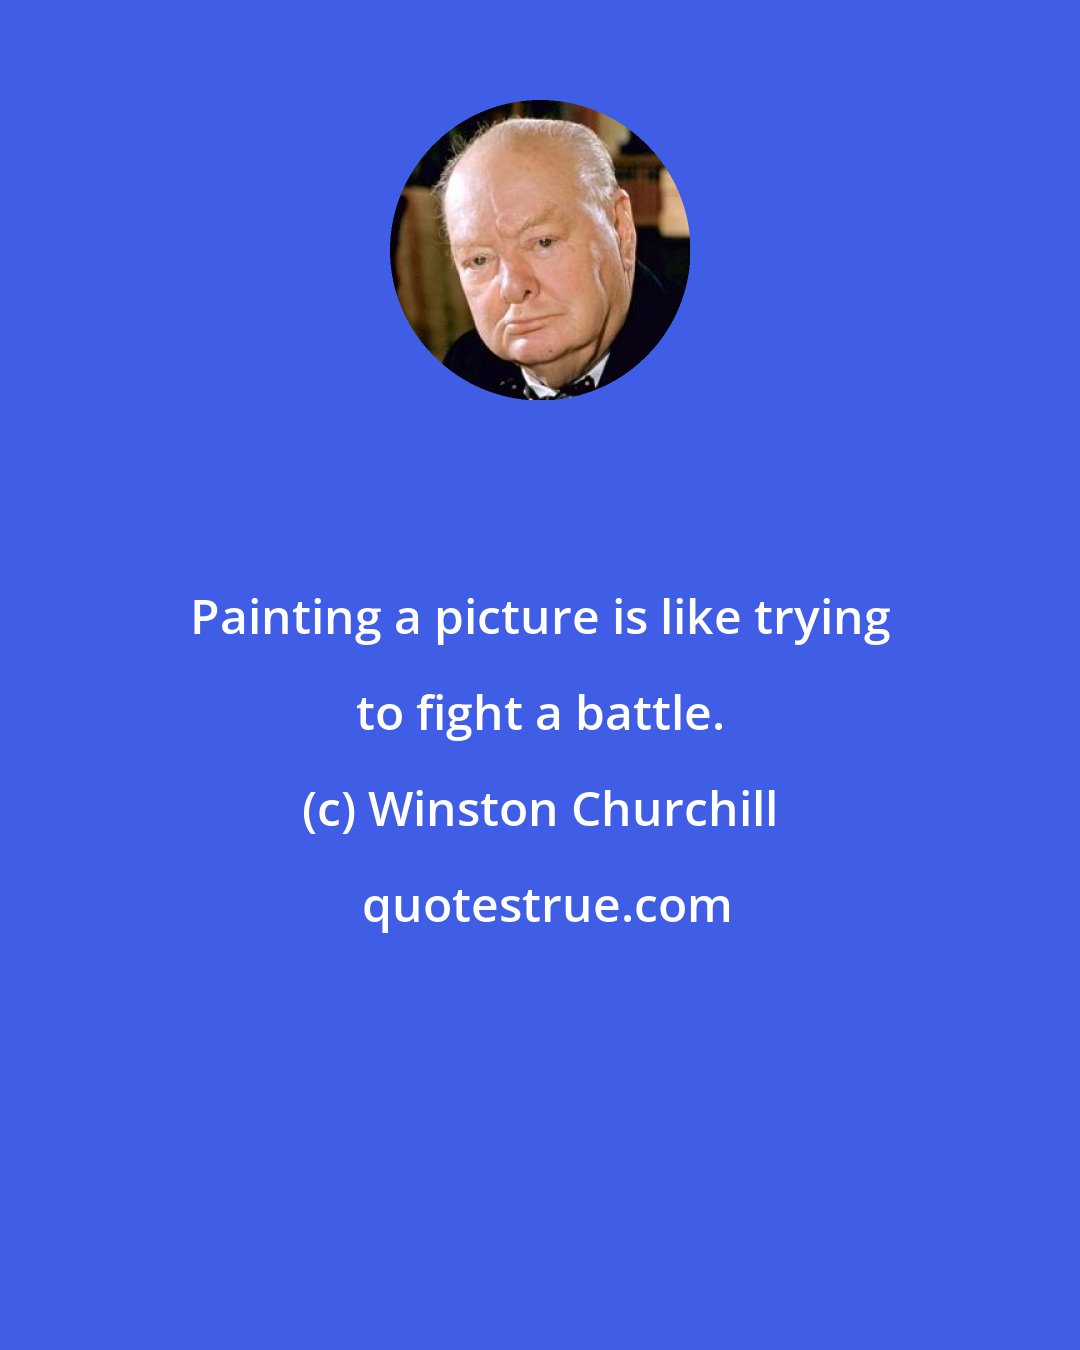 Winston Churchill: Painting a picture is like trying to fight a battle.